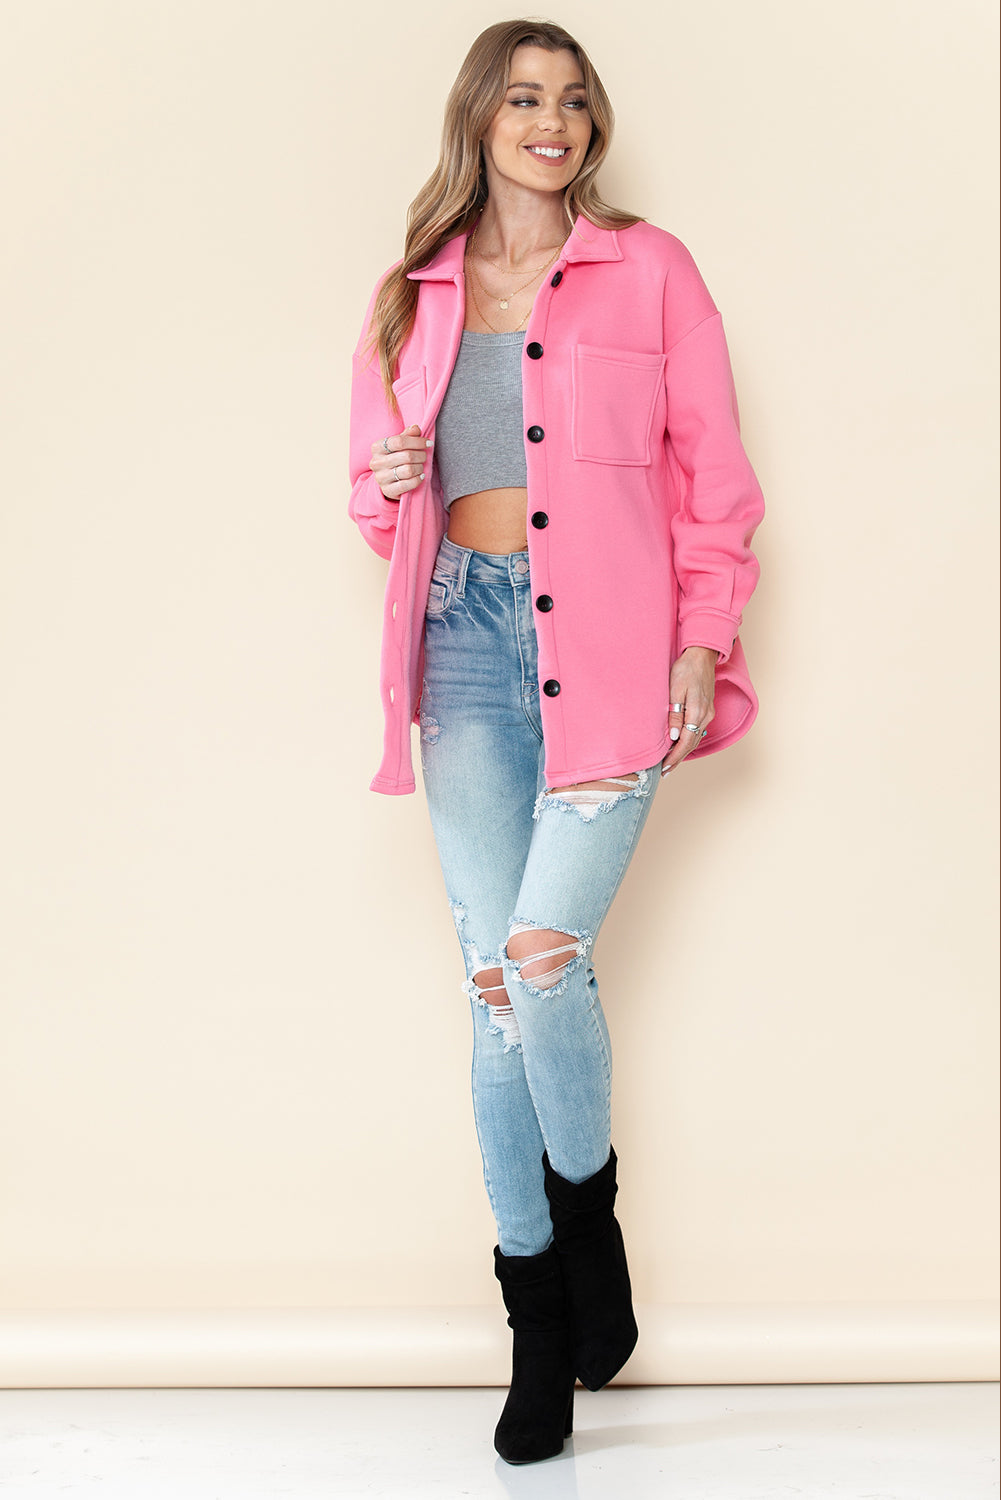 Pink Collared Pockets Button Up Jacket